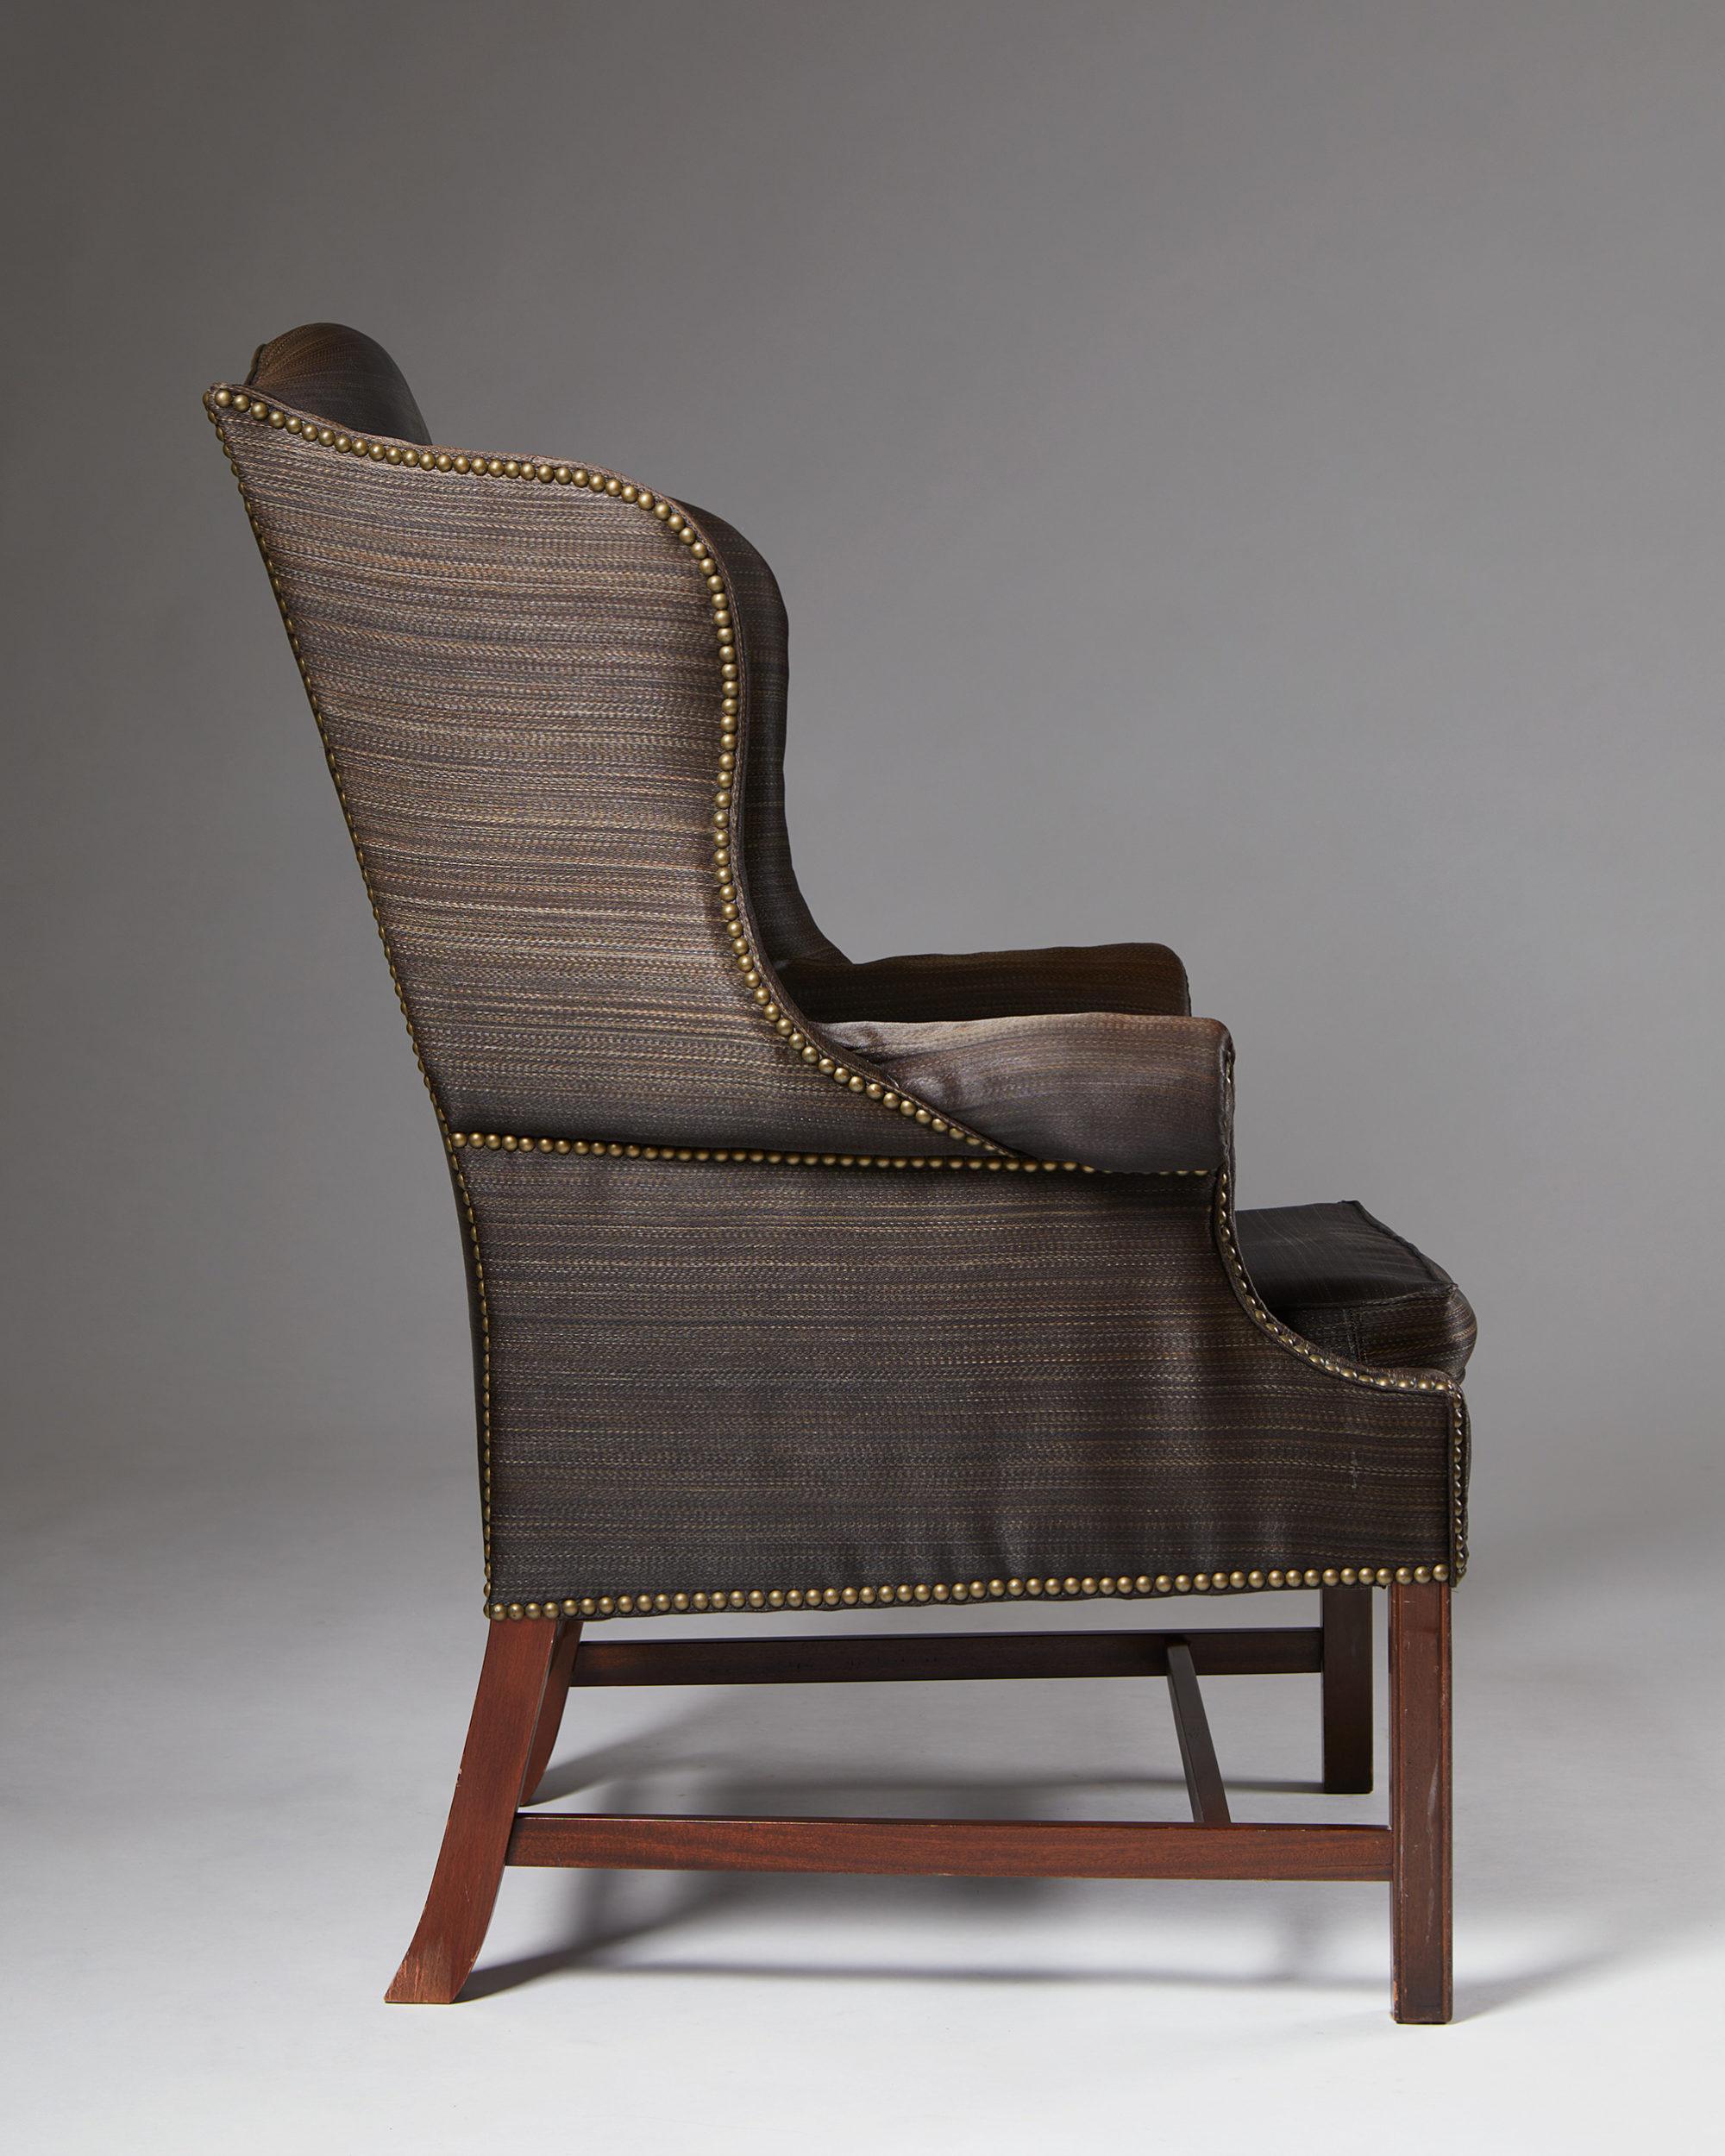 High-back wing chair, anonymous, Denmark, 1950s.
Mahogany and horsehair.

Measures: H: 110.5 cm/ 3' 7 1/2